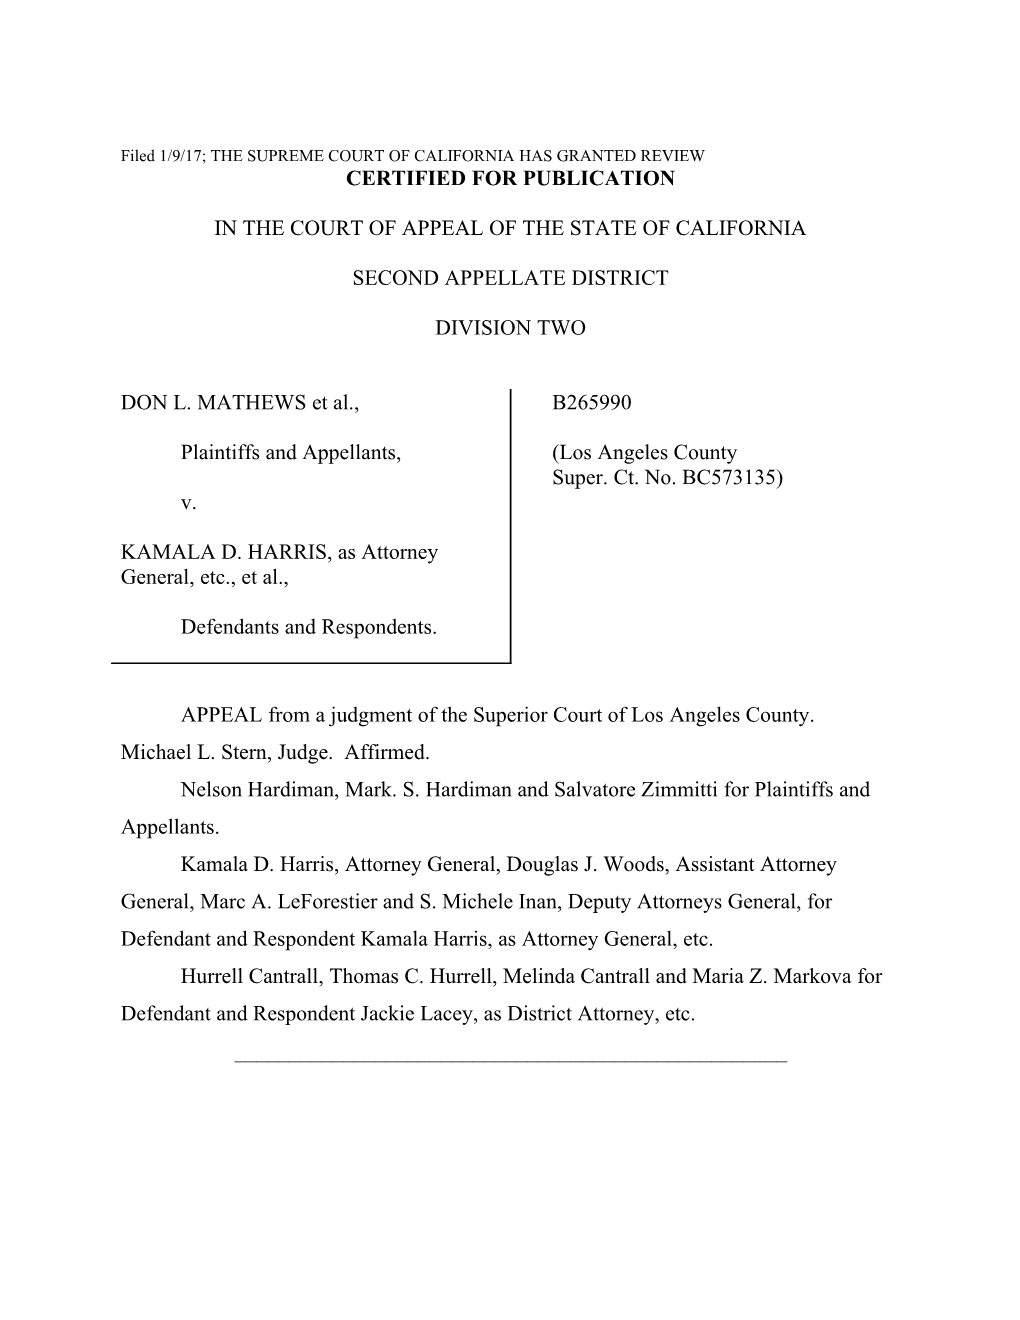 Filed 1/9/17; the SUPREME COURT of CALIFORNIA HAS GRANTED REVIEW